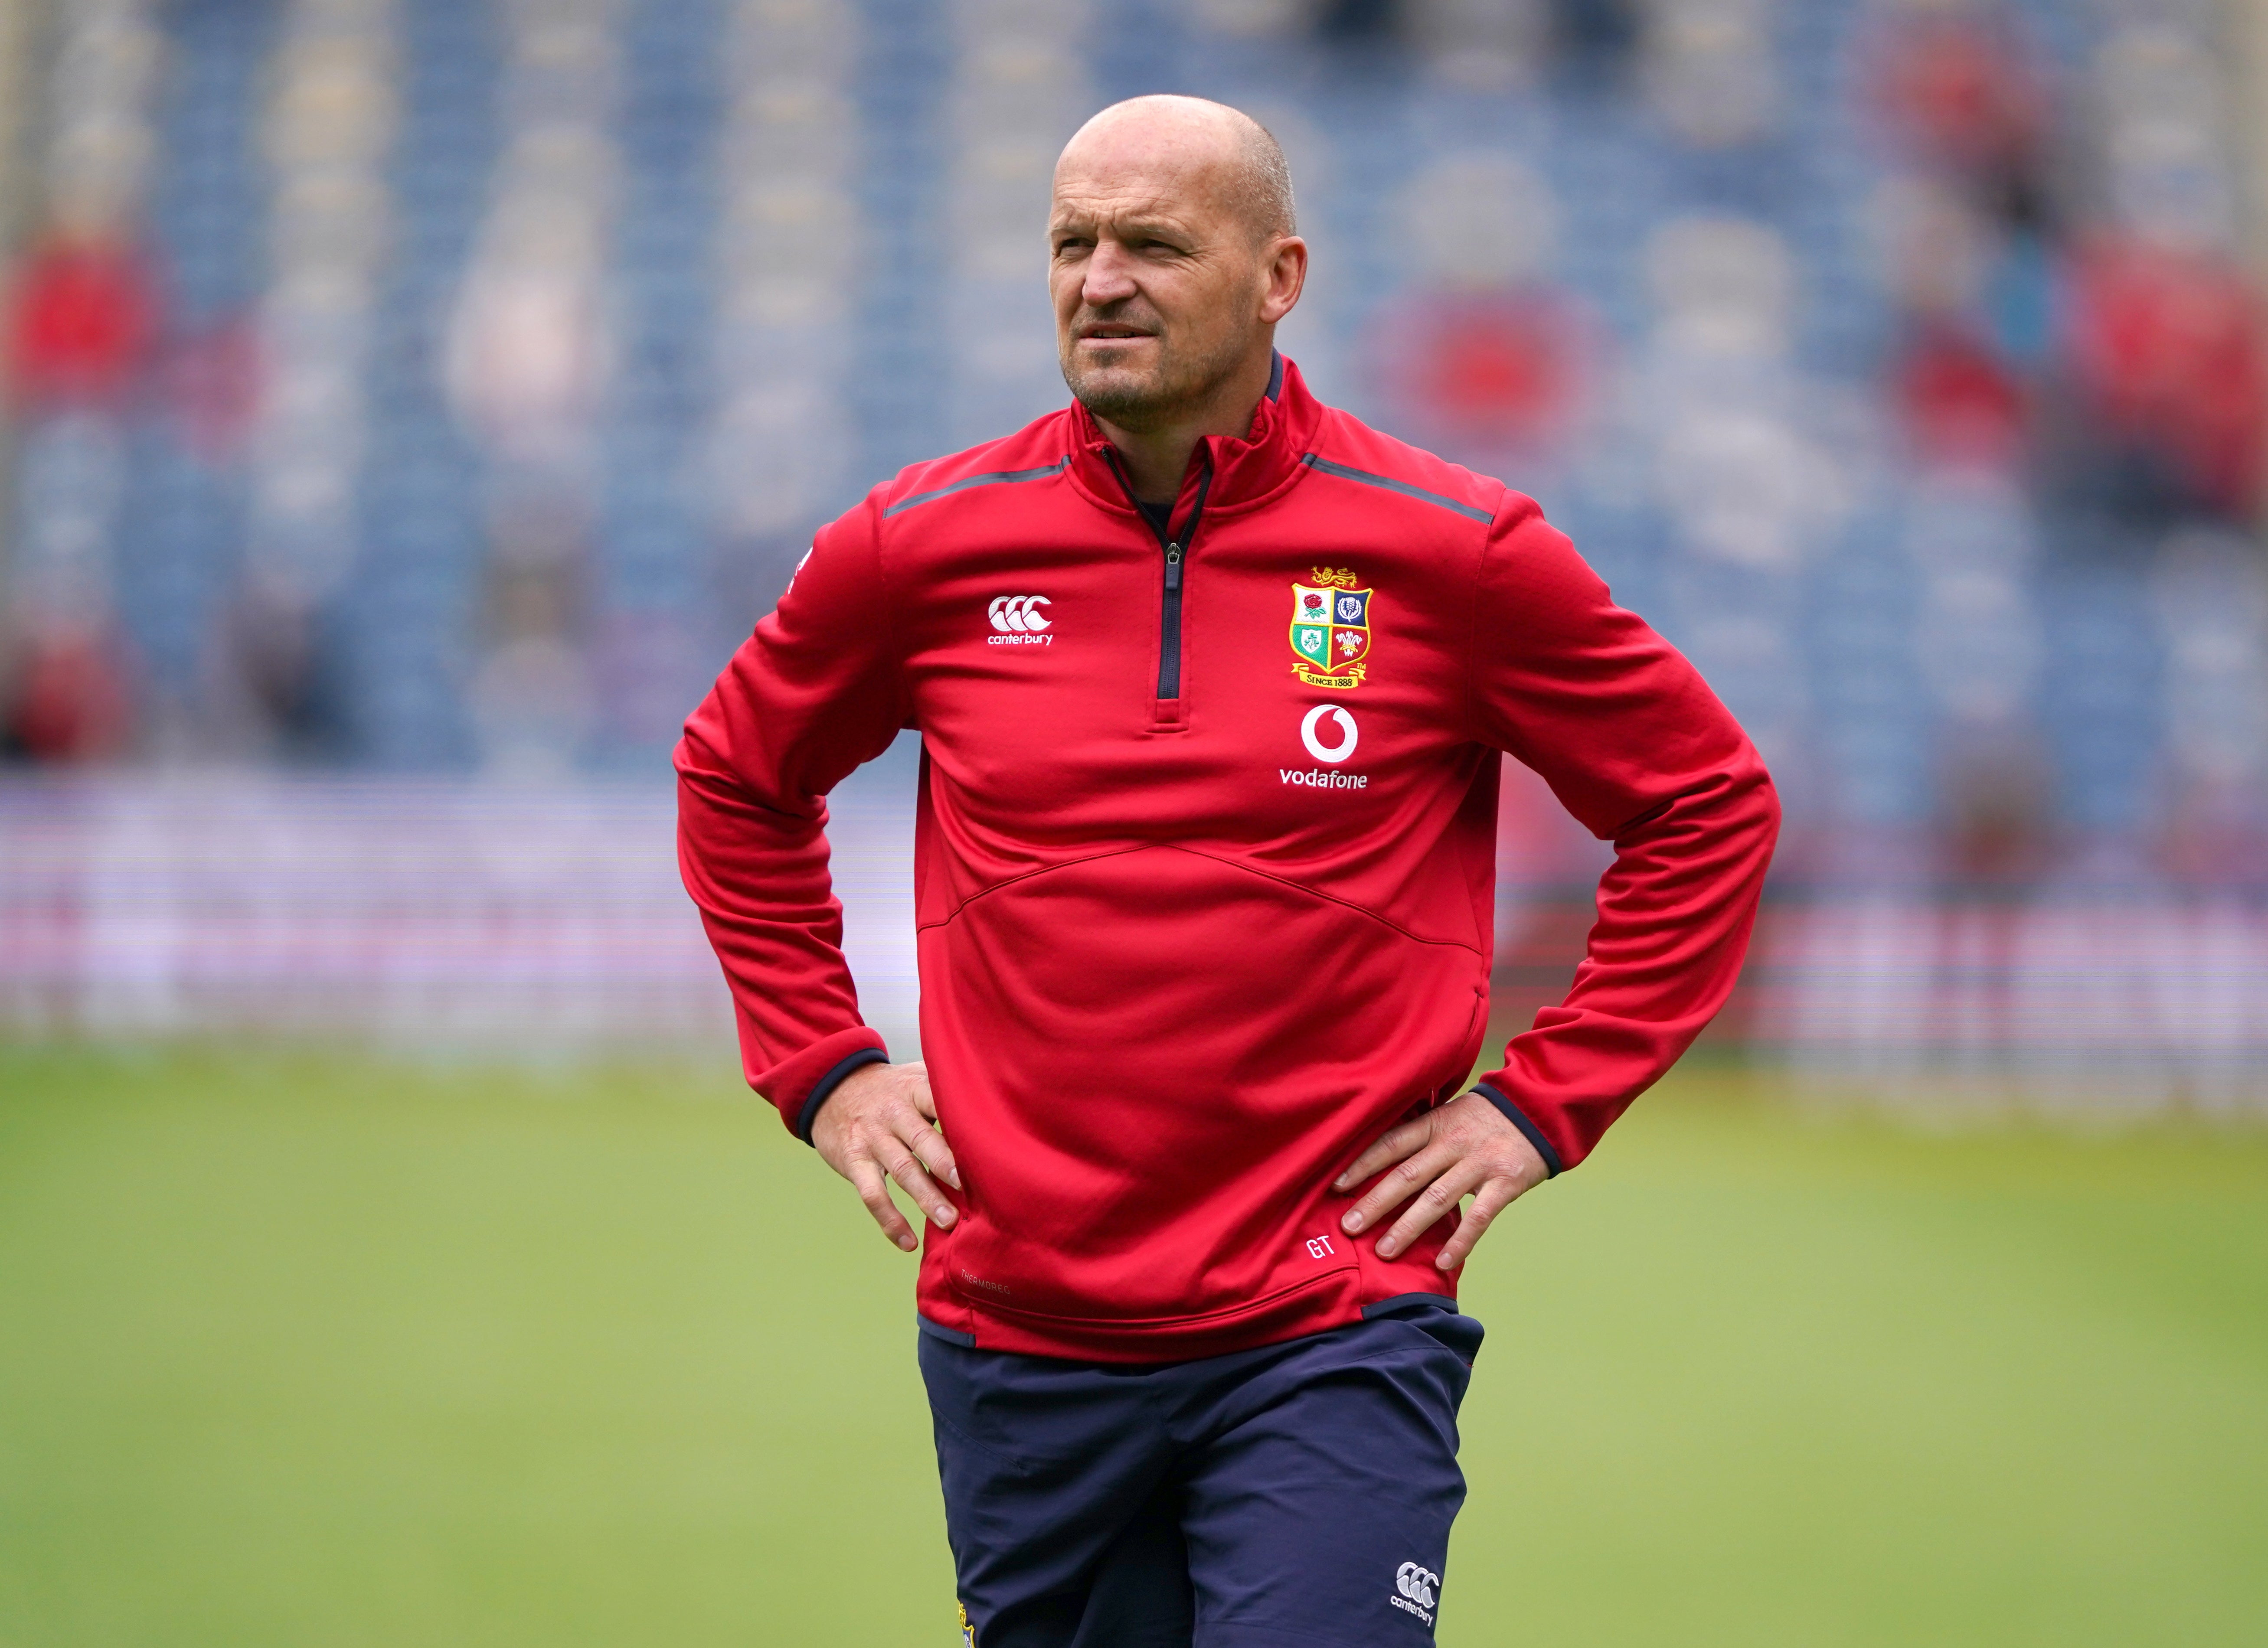 Attack coach Gregor Townsend insists the Lions have a special opportunity against the Stormers